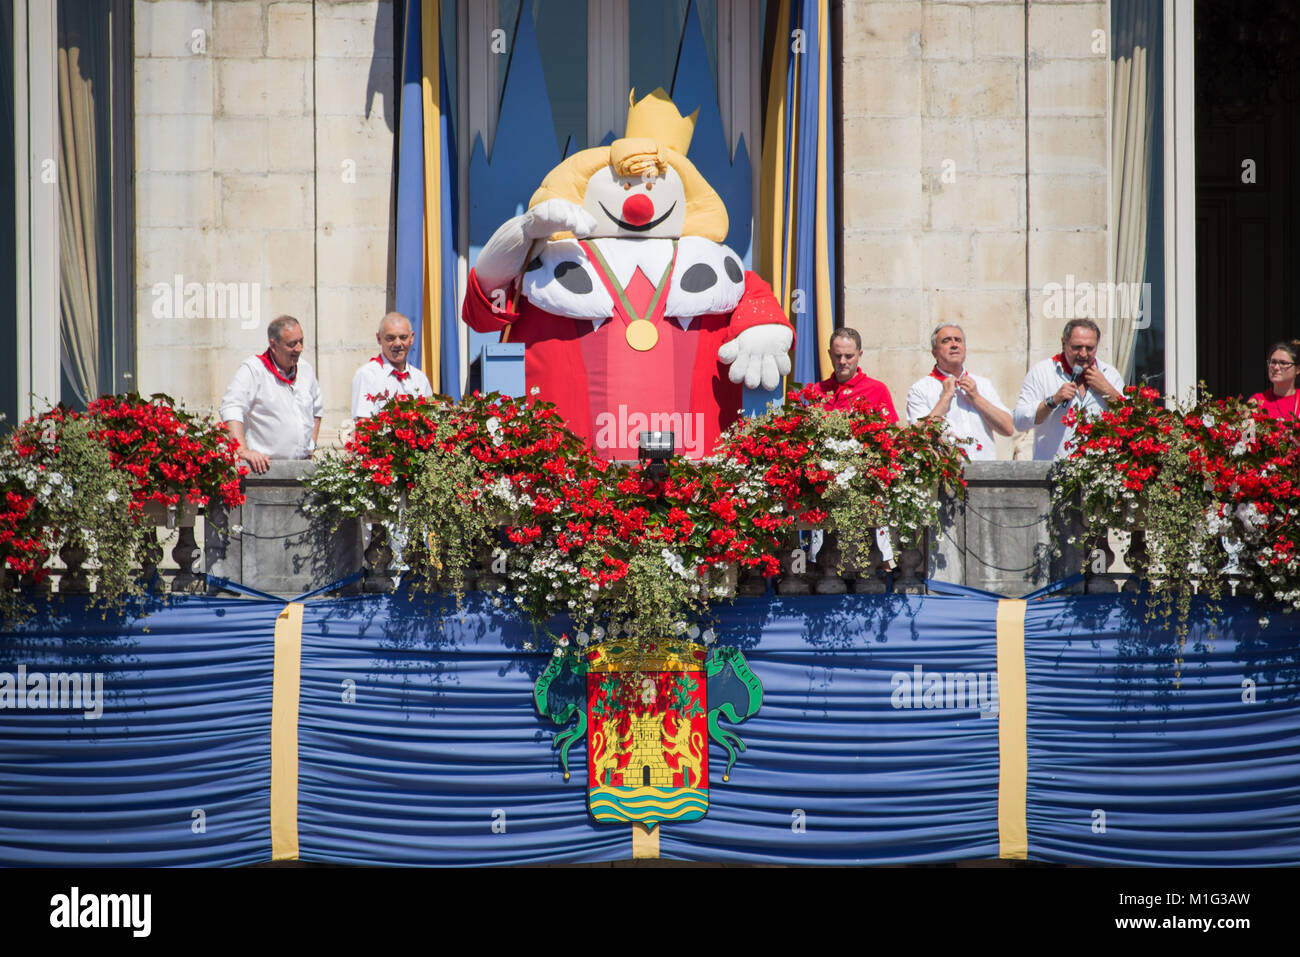 King Leon puppet at the Summer festival of Bayonne (Fetes de Bayonne), France Stock Photo